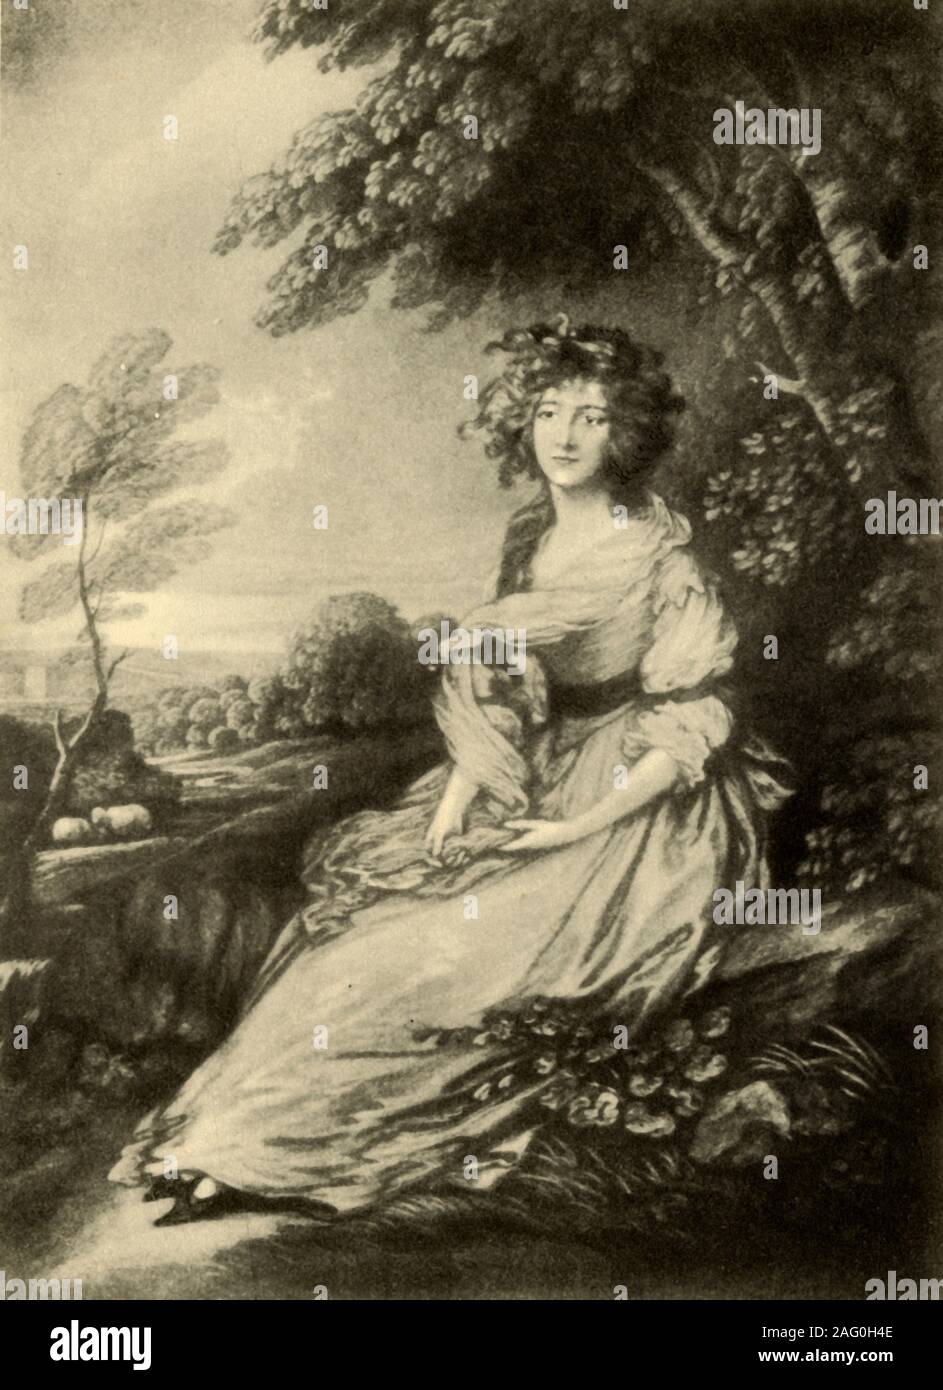 'Mrs. Sheridan', c1785, (1942). Portrait of Elizabeth Ann Sheridan (1754-1792), British singer and second daughter of the composer Thomas Linley. In 1772 she eloped with and married the playwright and politician Richard Brinsley Sheridan. From &quot;English Women&quot;, by Edith Sitwell. [Collins, London, 1942] Stock Photo